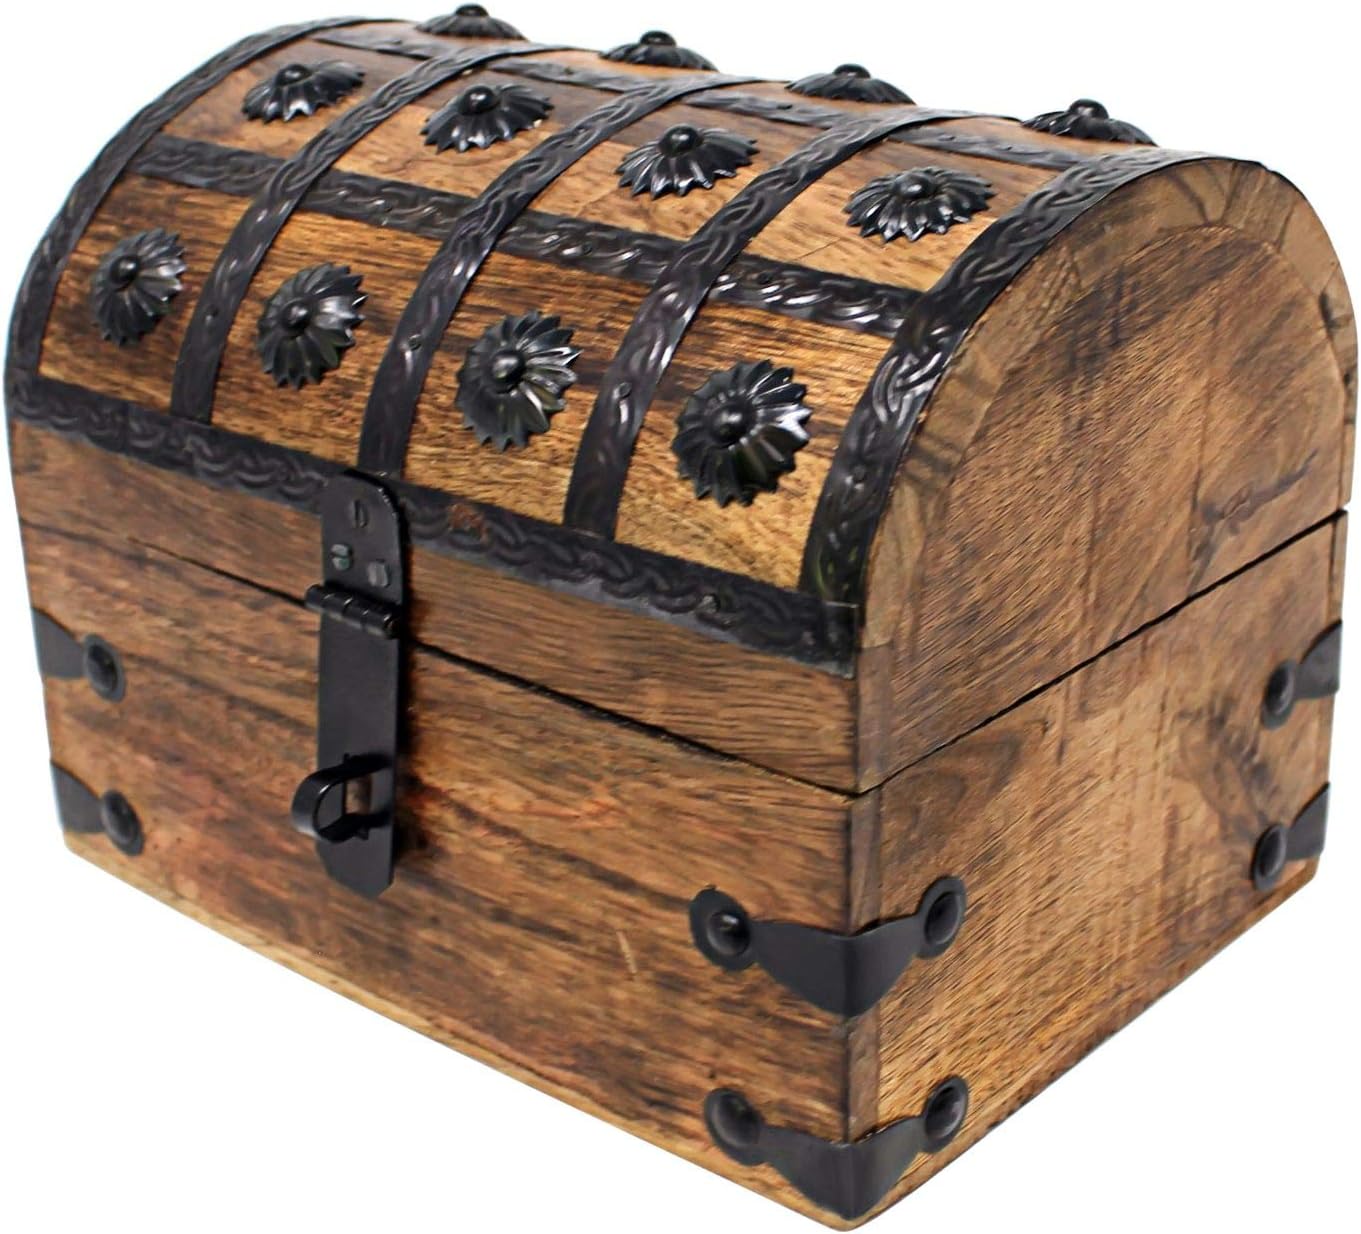 No Nautical Cove Wooden Pirates Treasure Chest Box with a Free Pirate  Treasure Map and Gold Coins/Gems